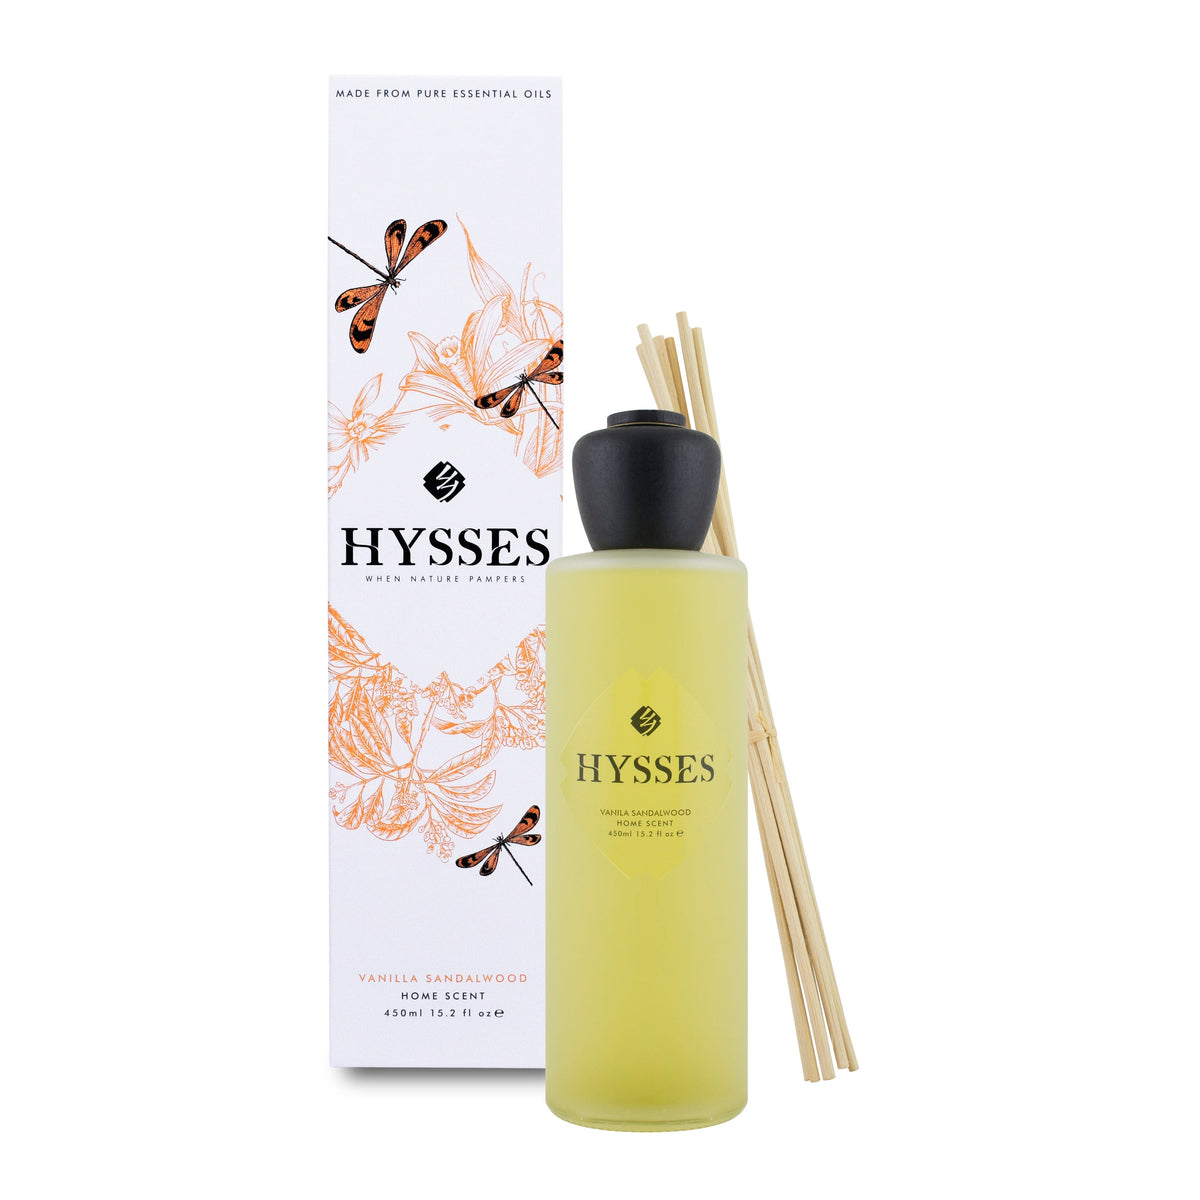 Hysses Home Scents 450ml Home Scent Reed Diffuser Vanilla Sandalwood